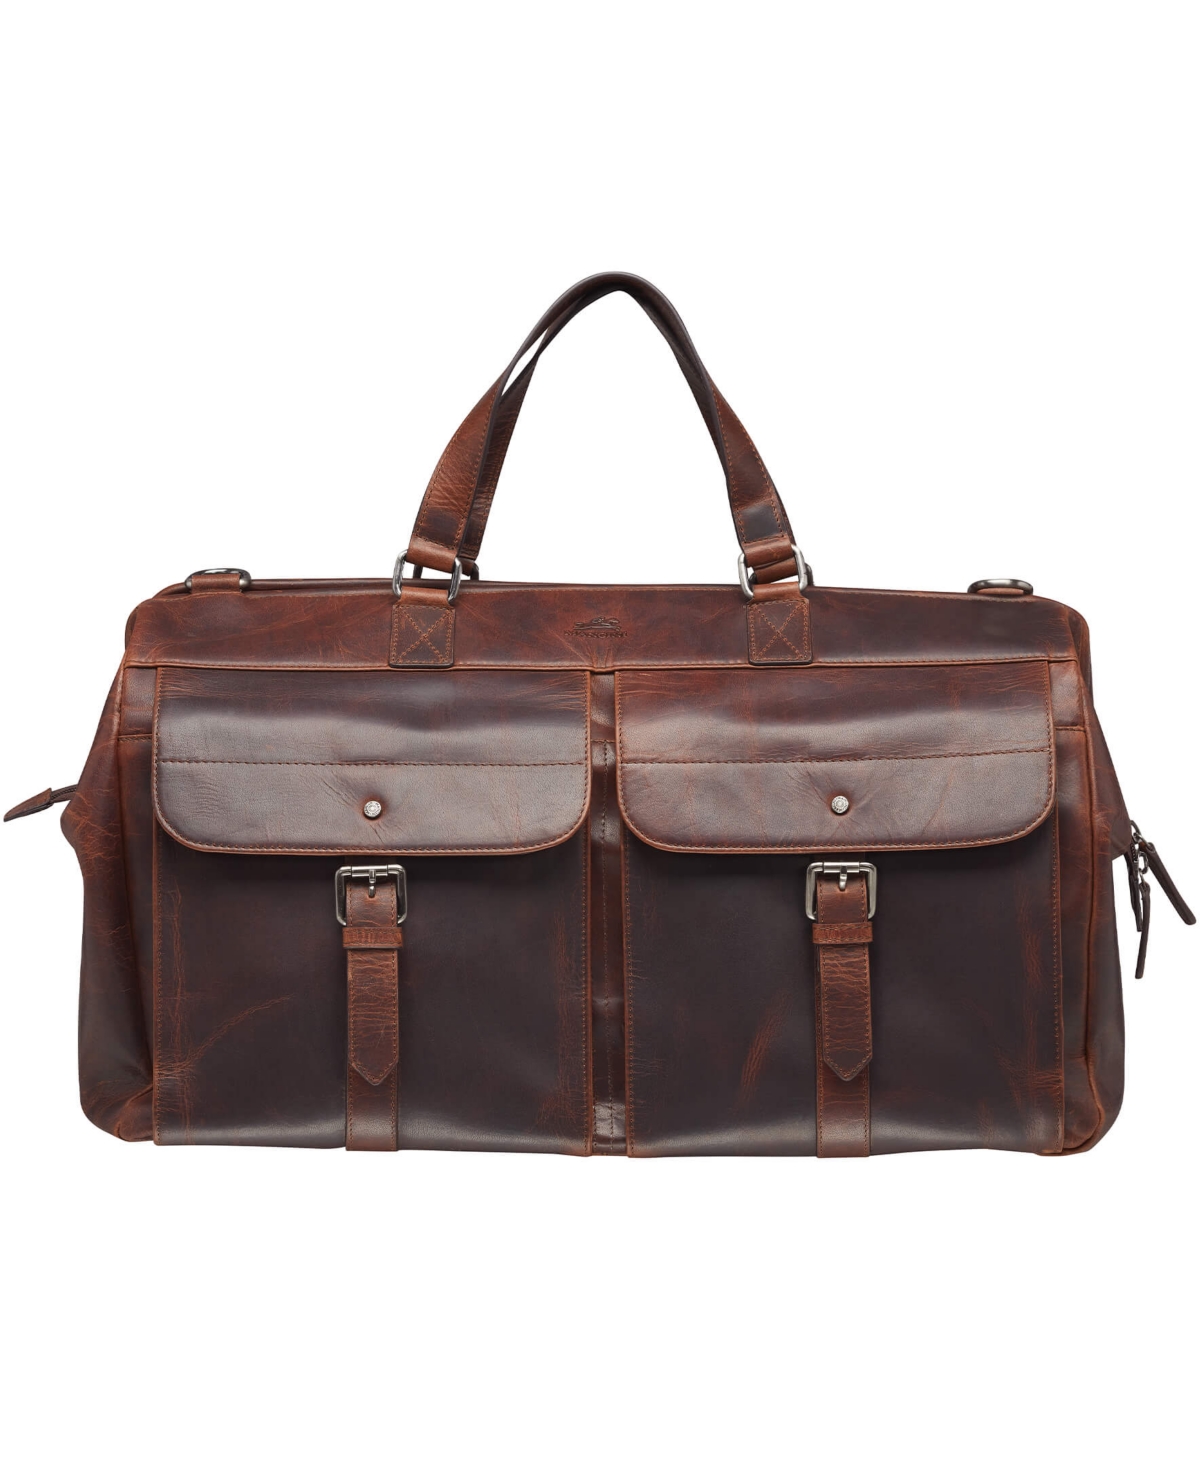 Mancini Men's Buffalo Dowel Rod Duffle Bag For Carry-on Travel In Brown